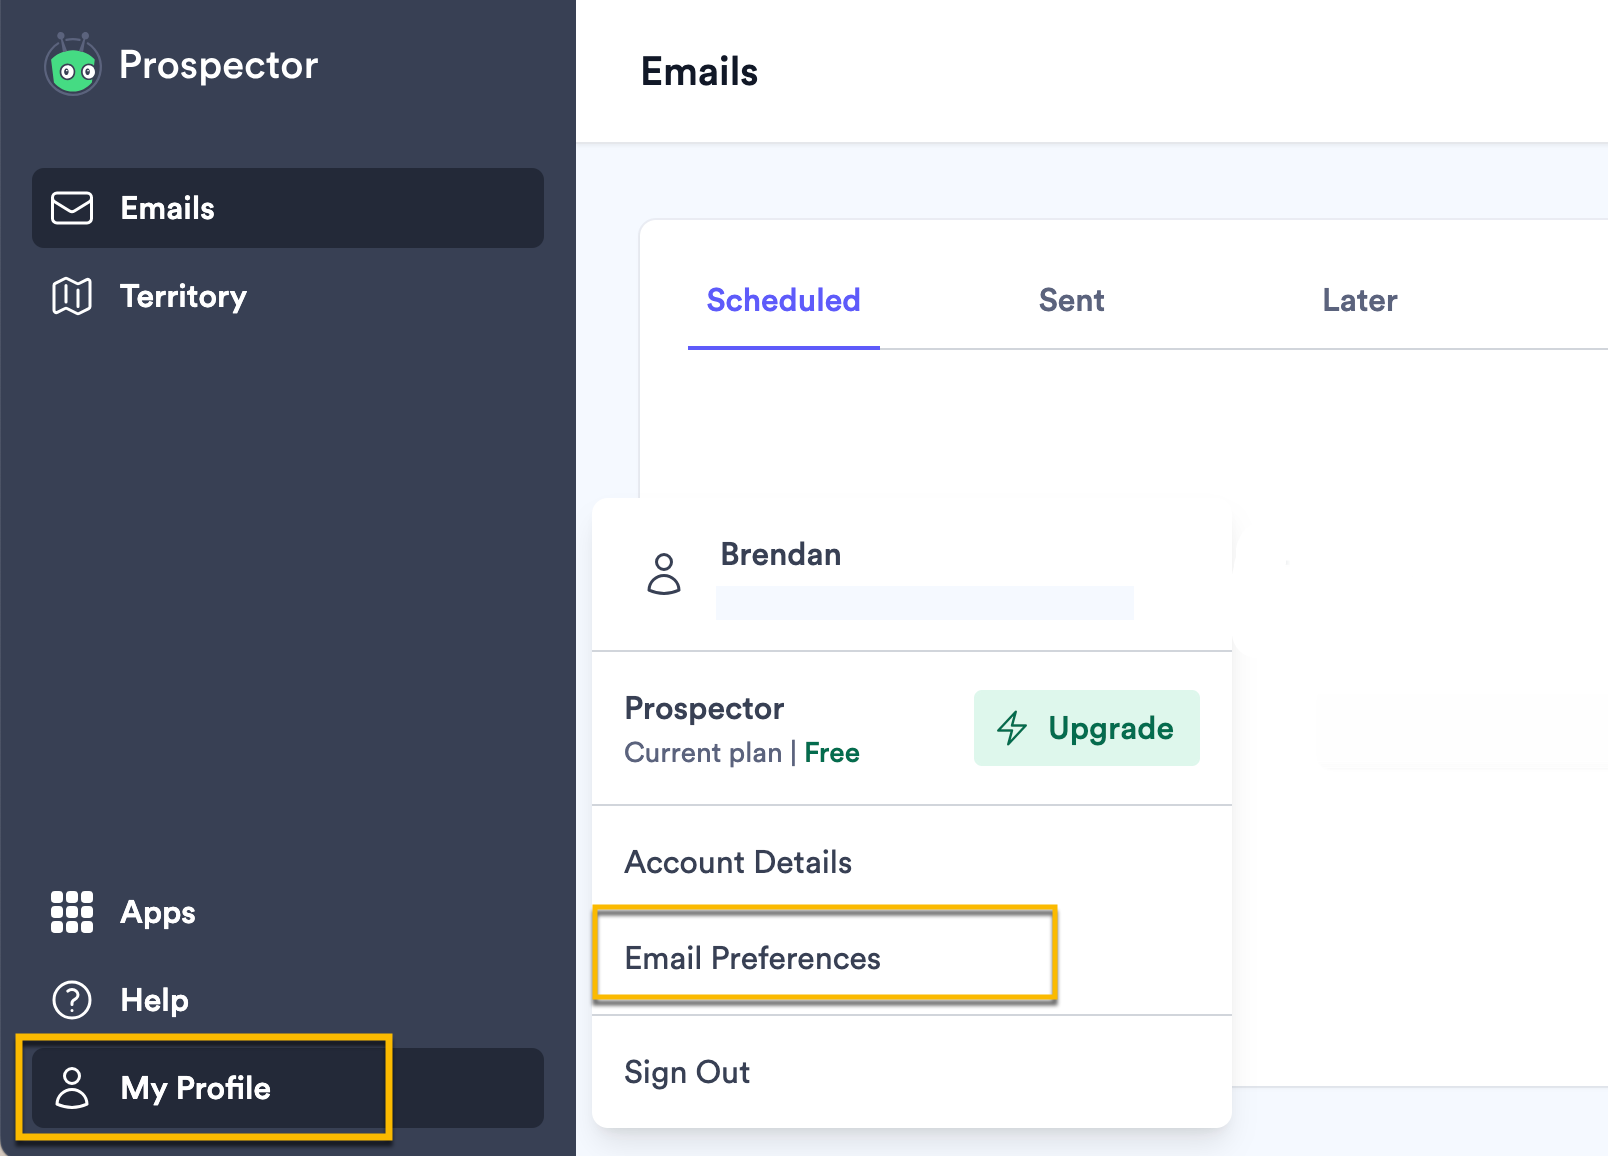 In Vidyard Prospector, selecting your profile to access your email preferences